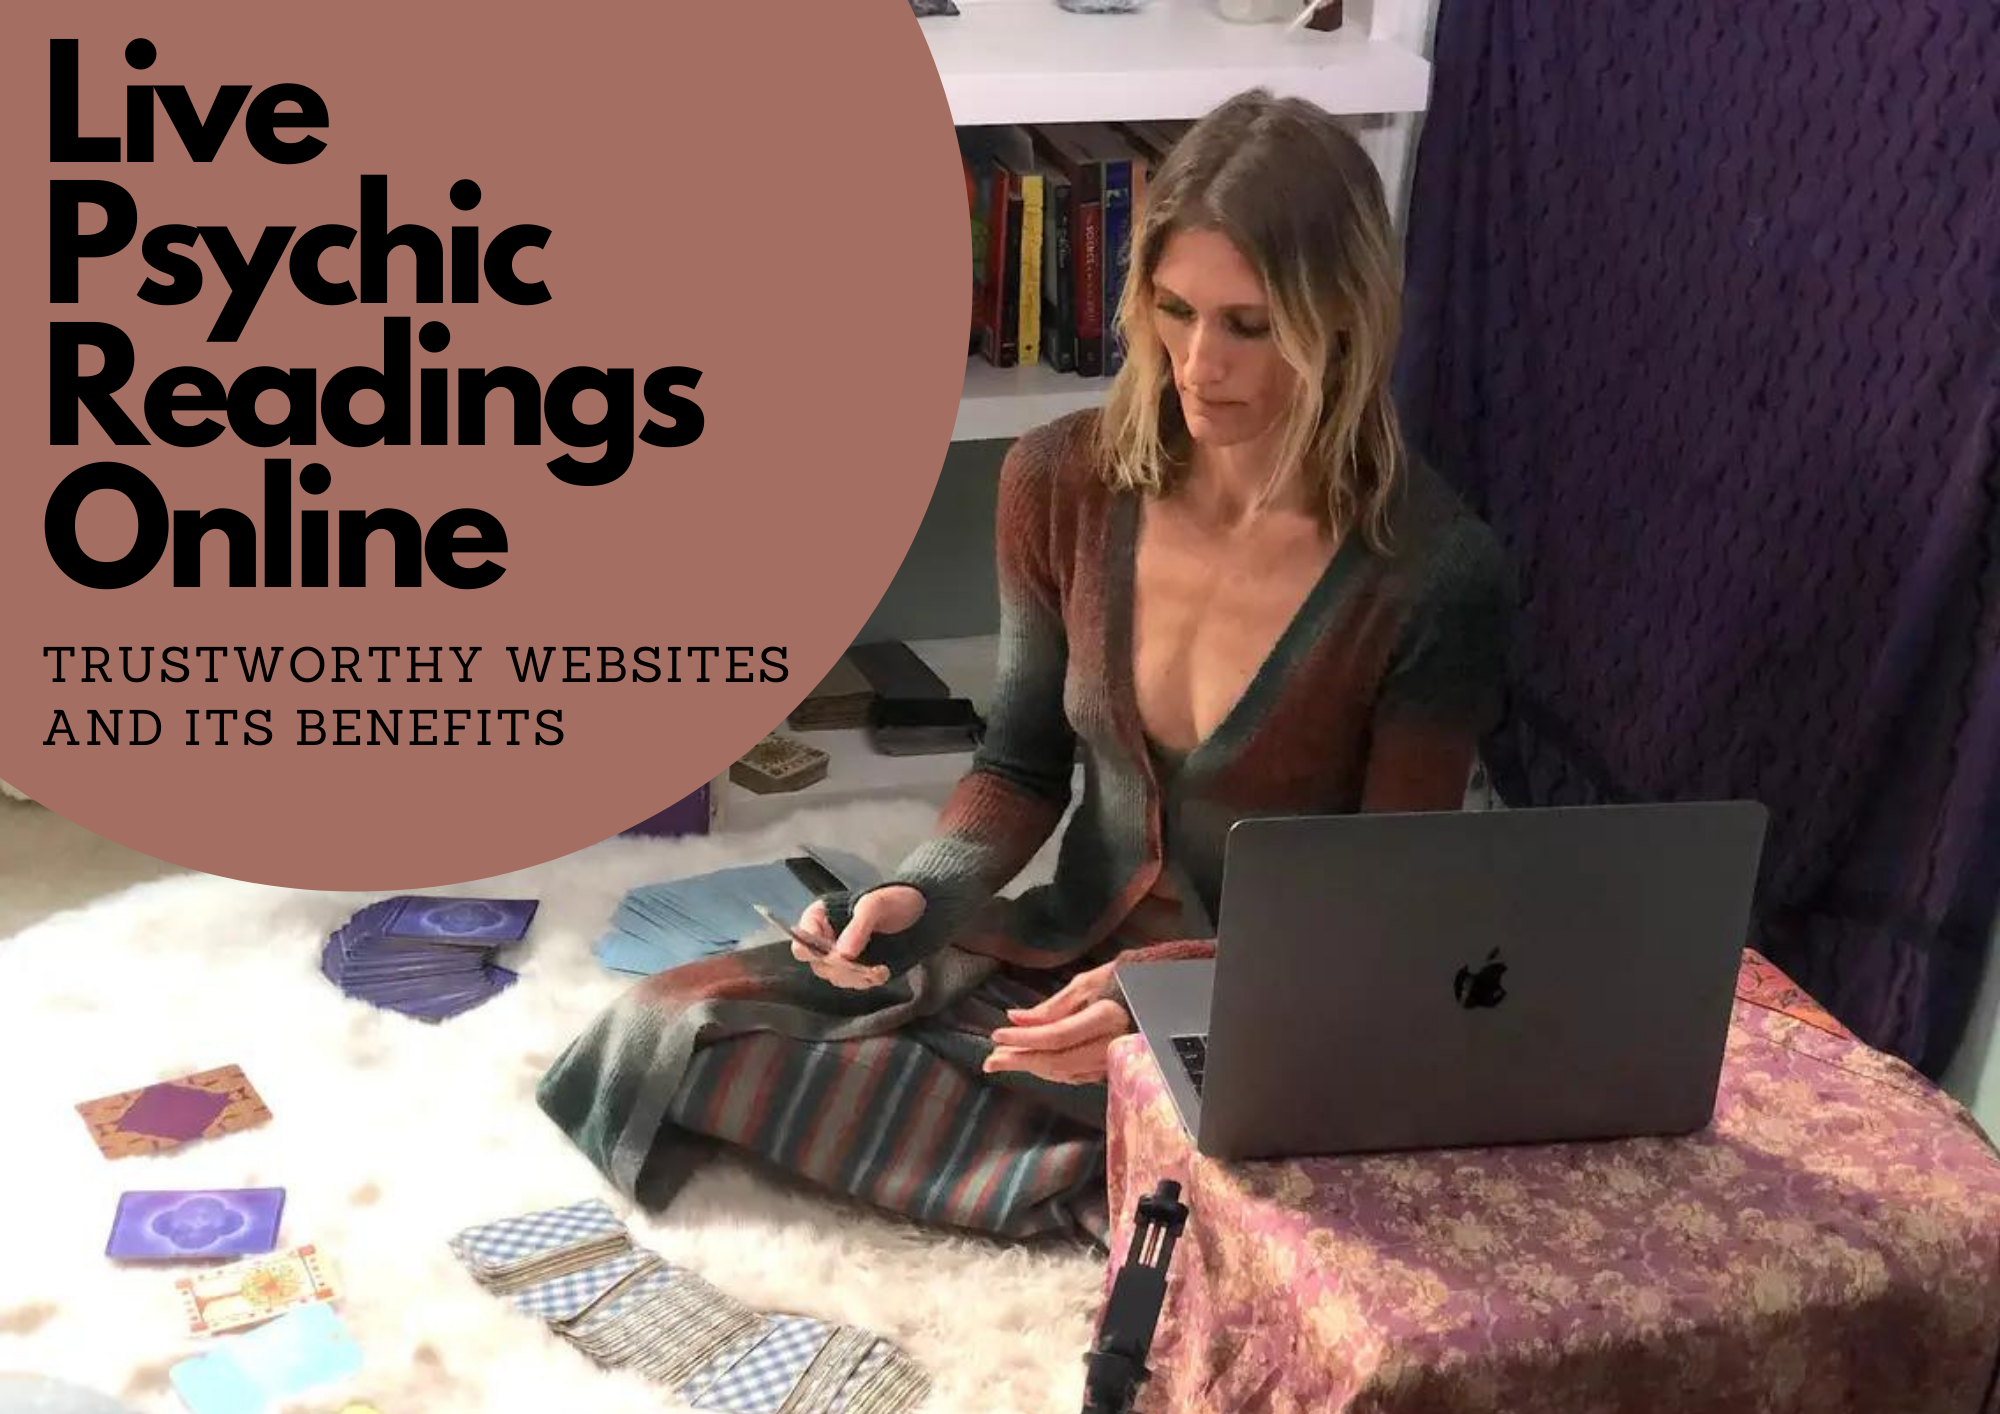 Live Psychic Readings Online - Trustworthy Websites And Its Benefits